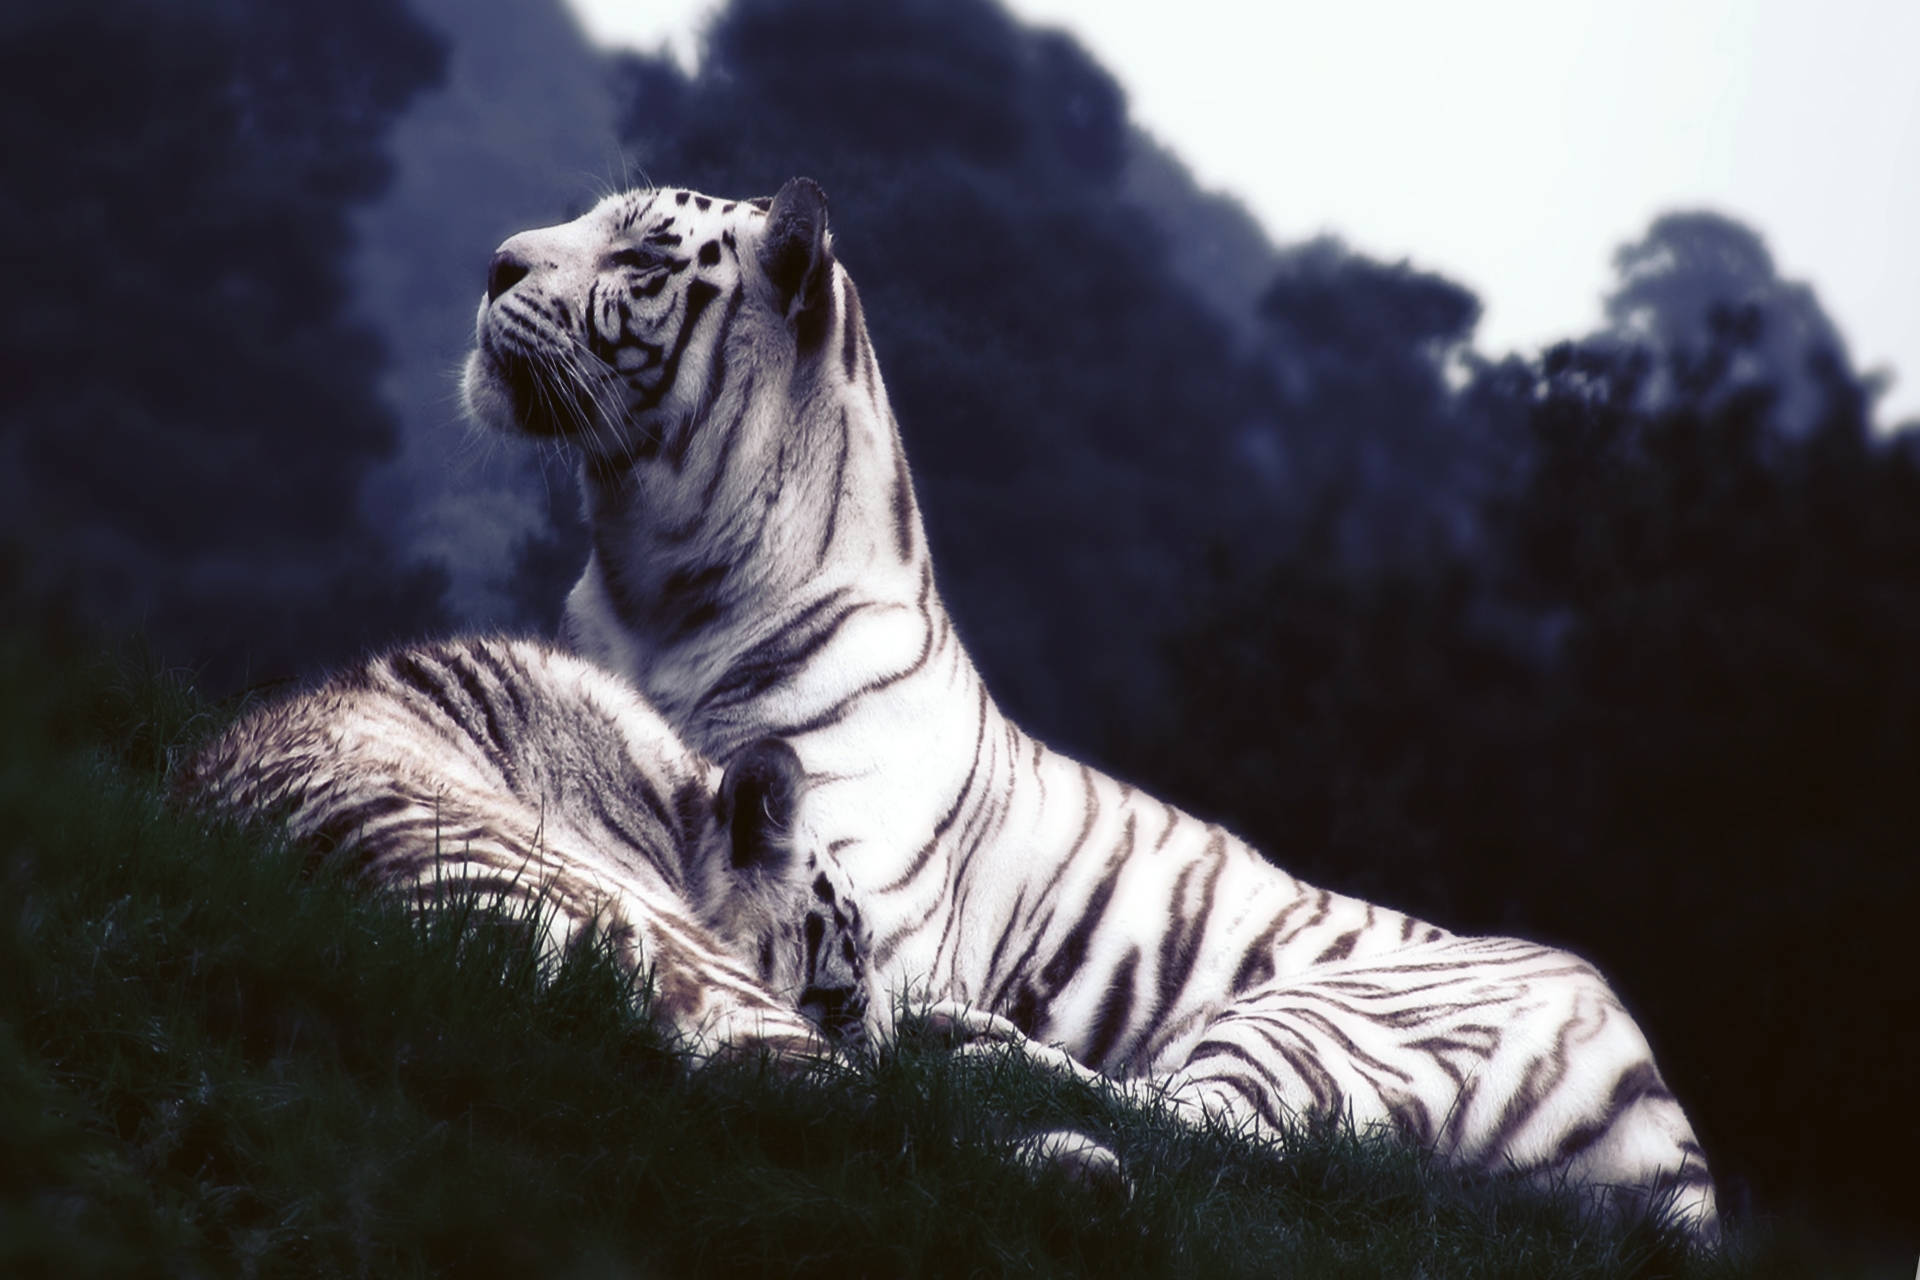 White Tigers On Grass